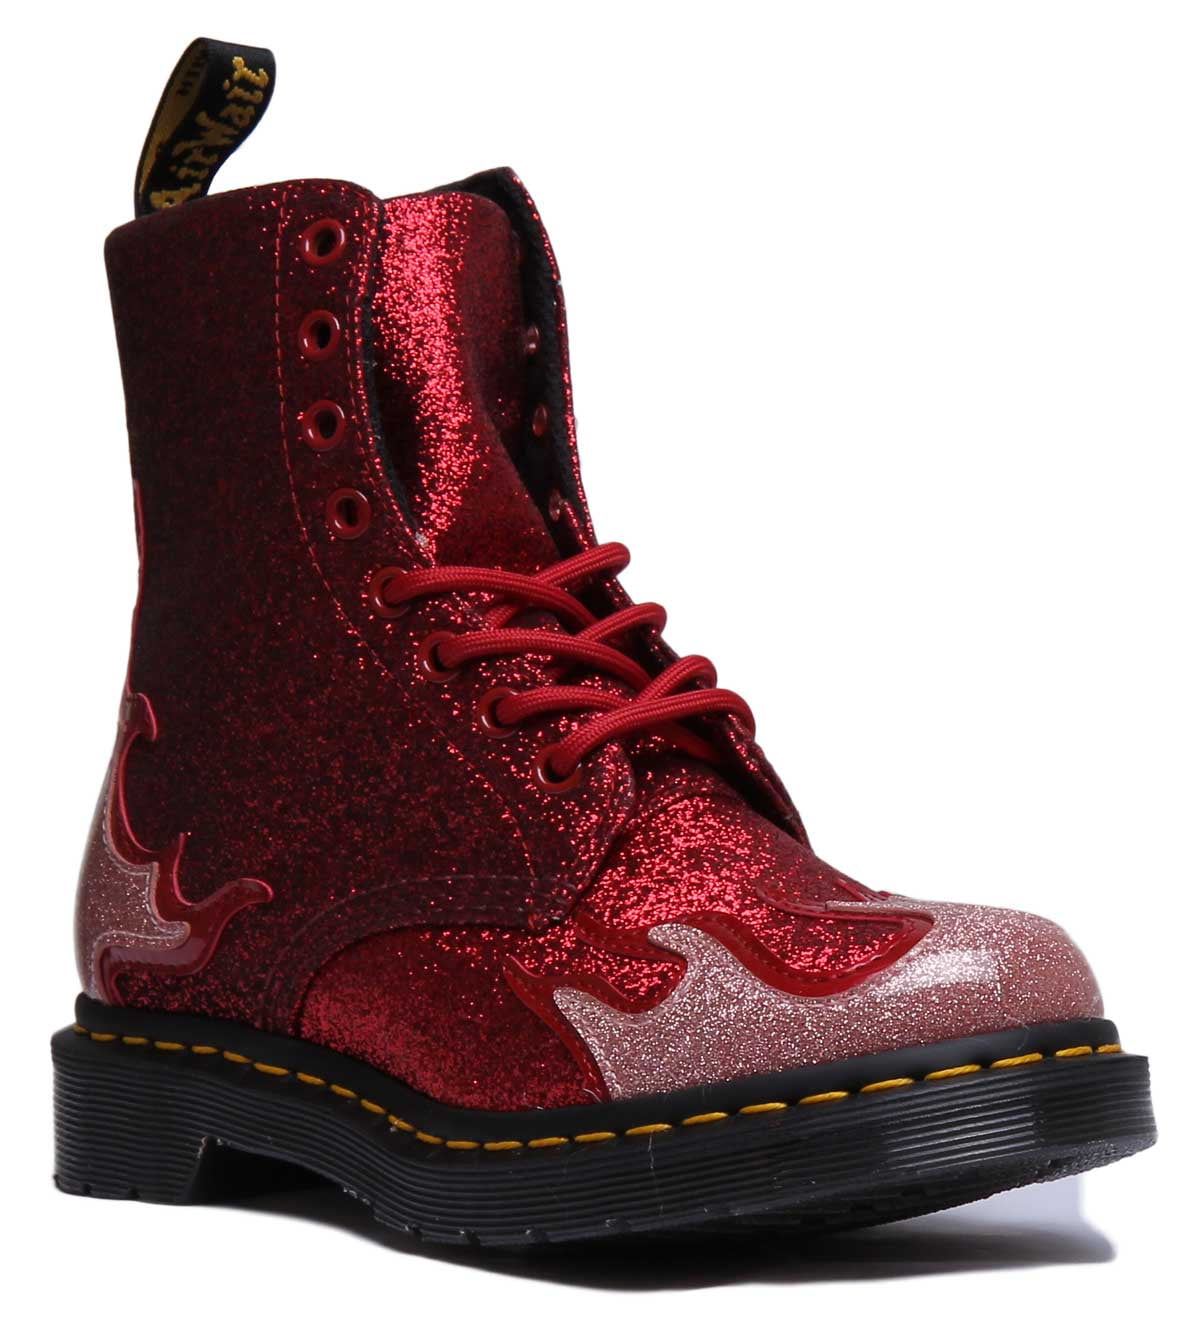 Dr Martens 1460 Flame Women's 8 Eyelet Lace Up Glitter Ankle Boots